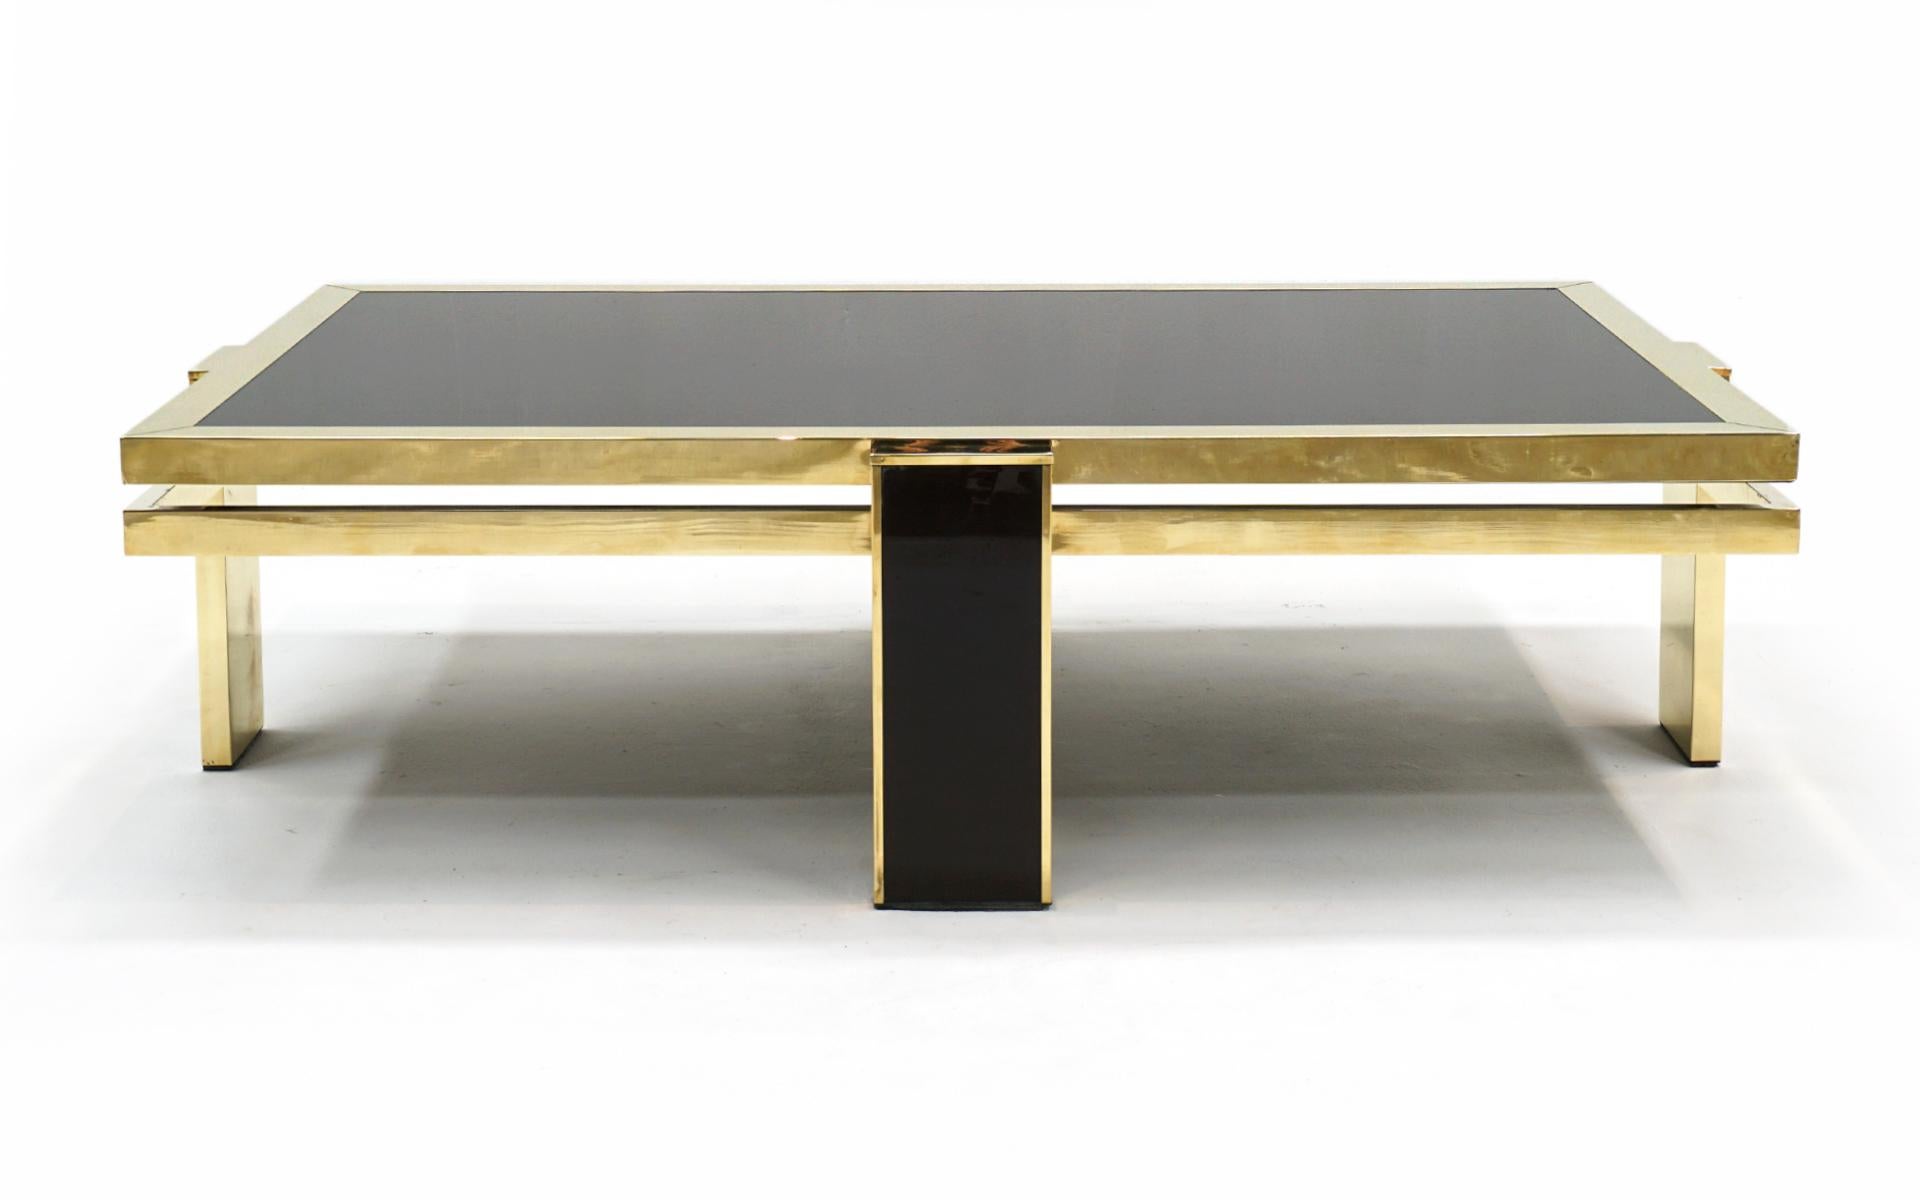 Large Solid brass and colored glass coffee table designed by Giacomo Sinopoli for Liwan's Rome 1970's. The solid brass frame has been professionally polished to a beautiful luster. The dark colored glass top is built in and completely supported on